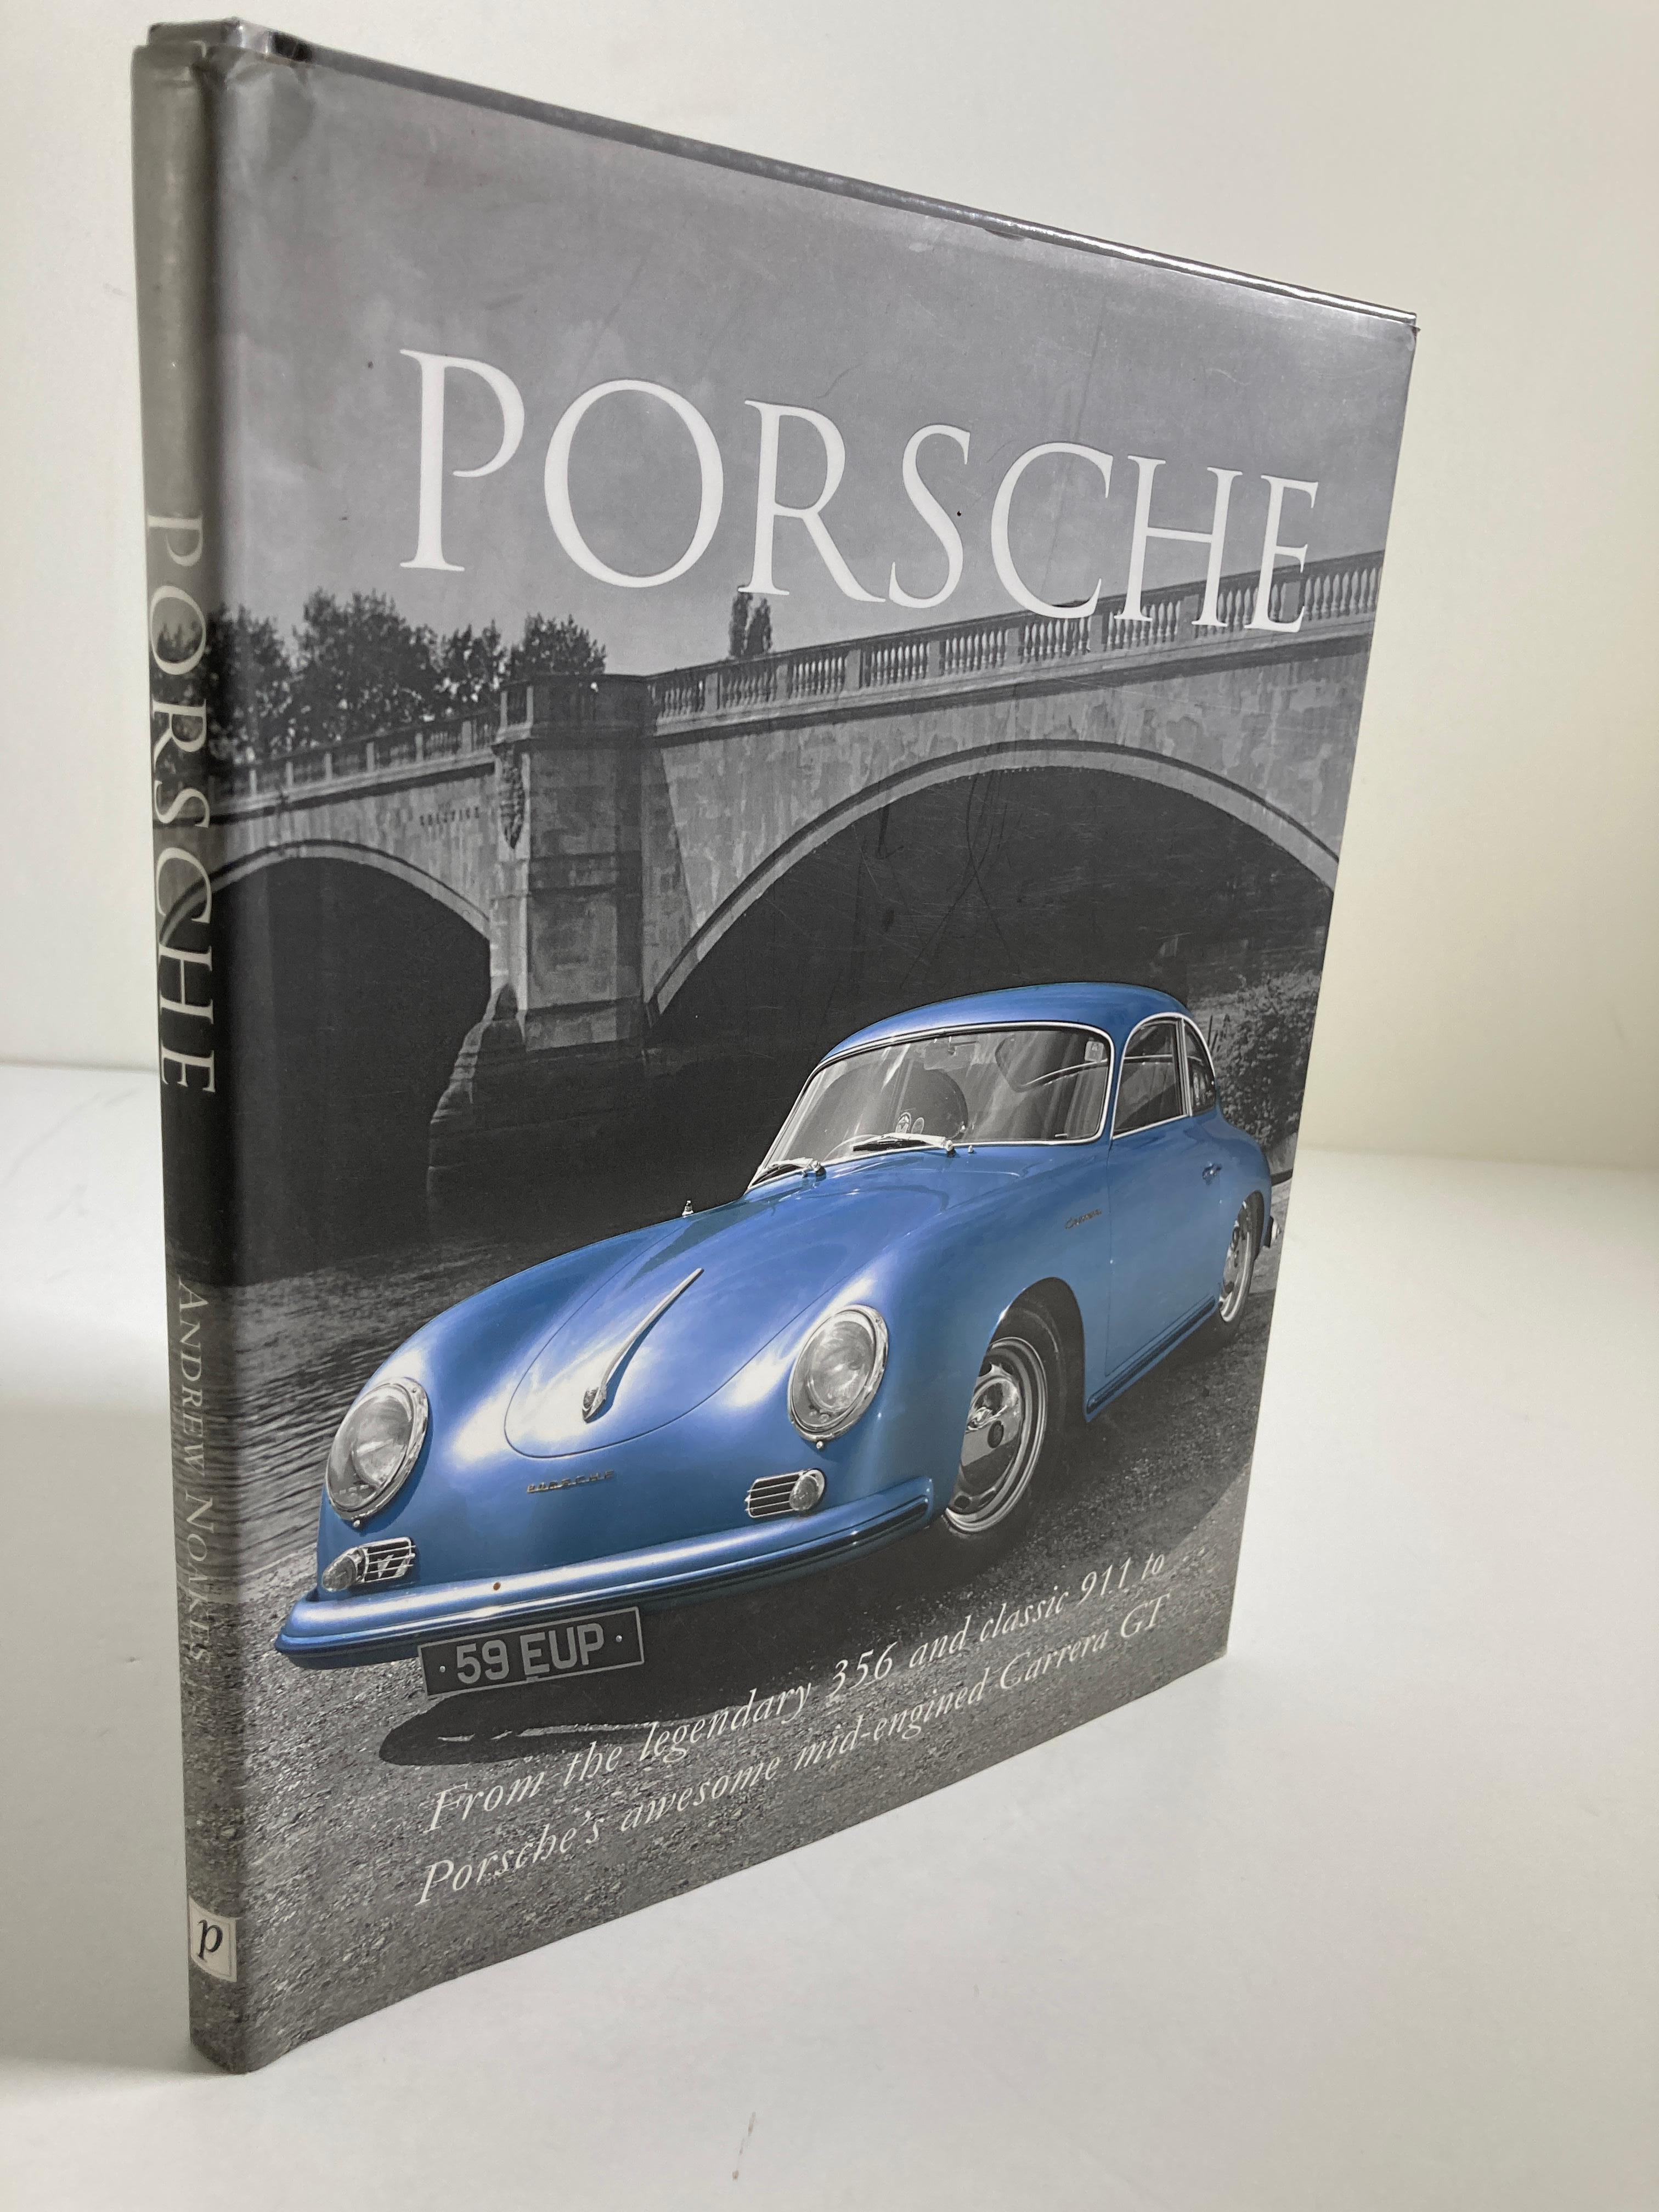 English Porsche from the Legendary 356 and Classic 911 to Carrera GT Book